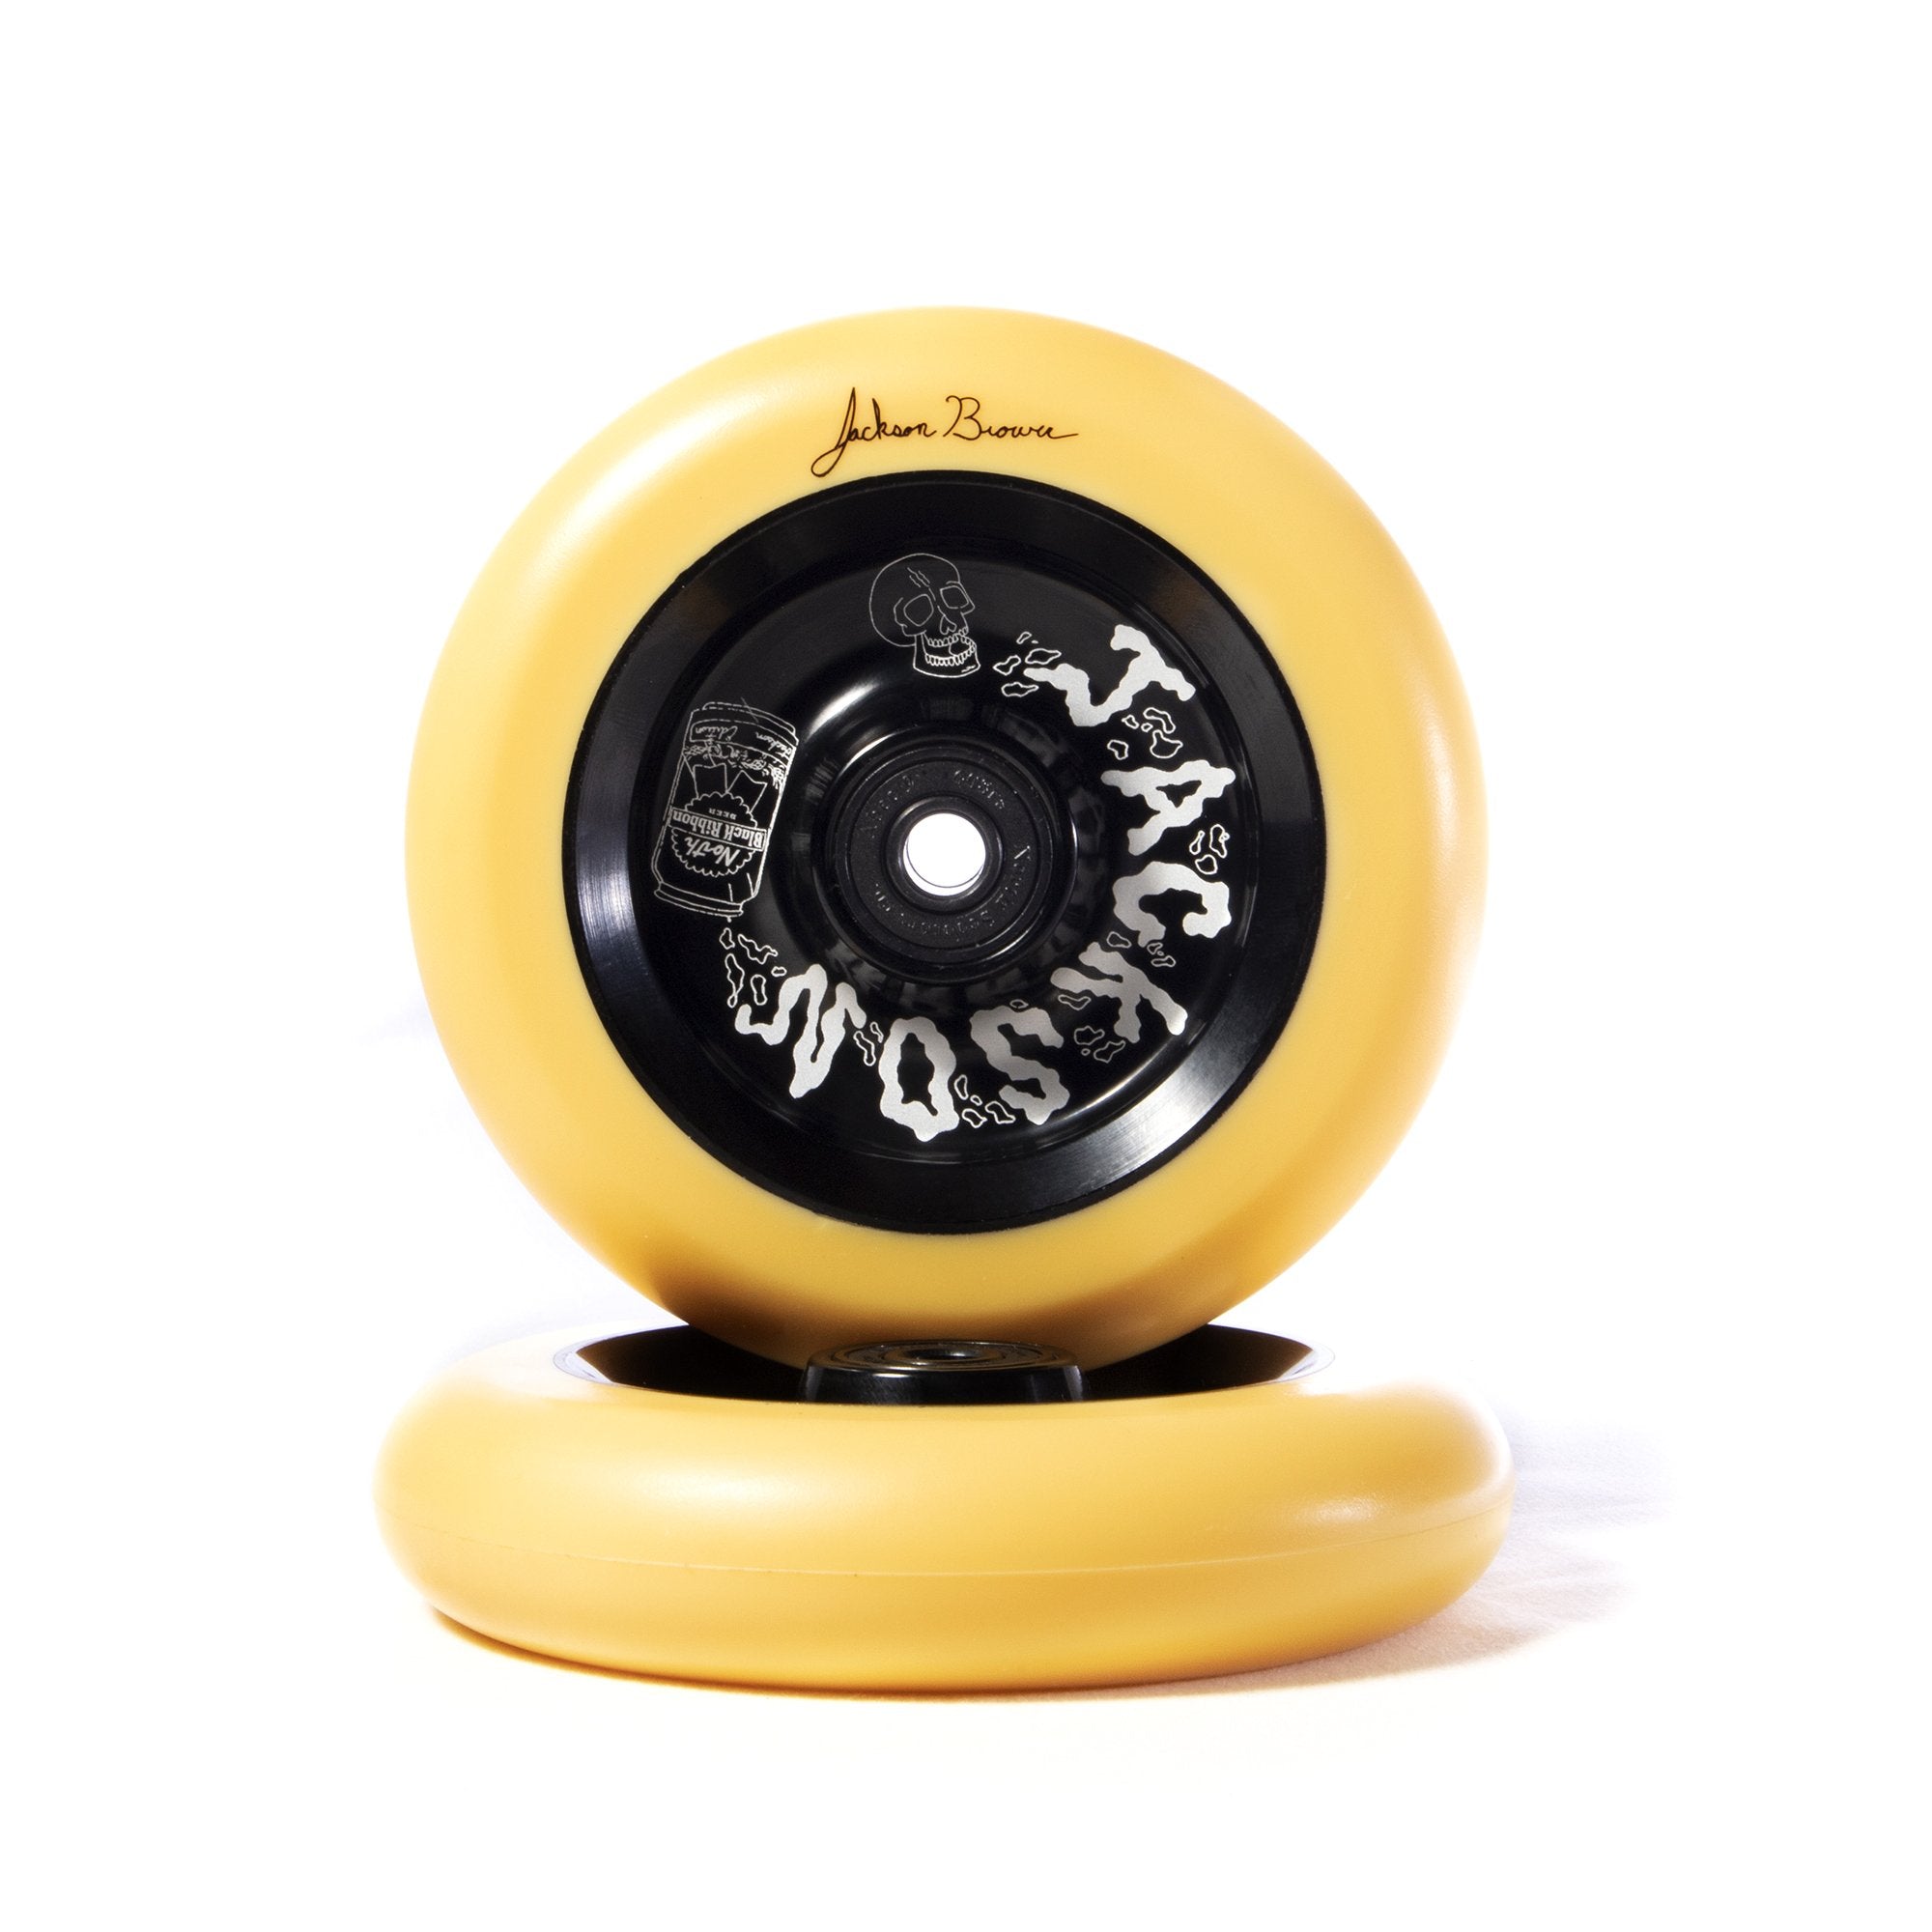 North Scooters "Jackson Brower" Signature - 24mm x 110mm